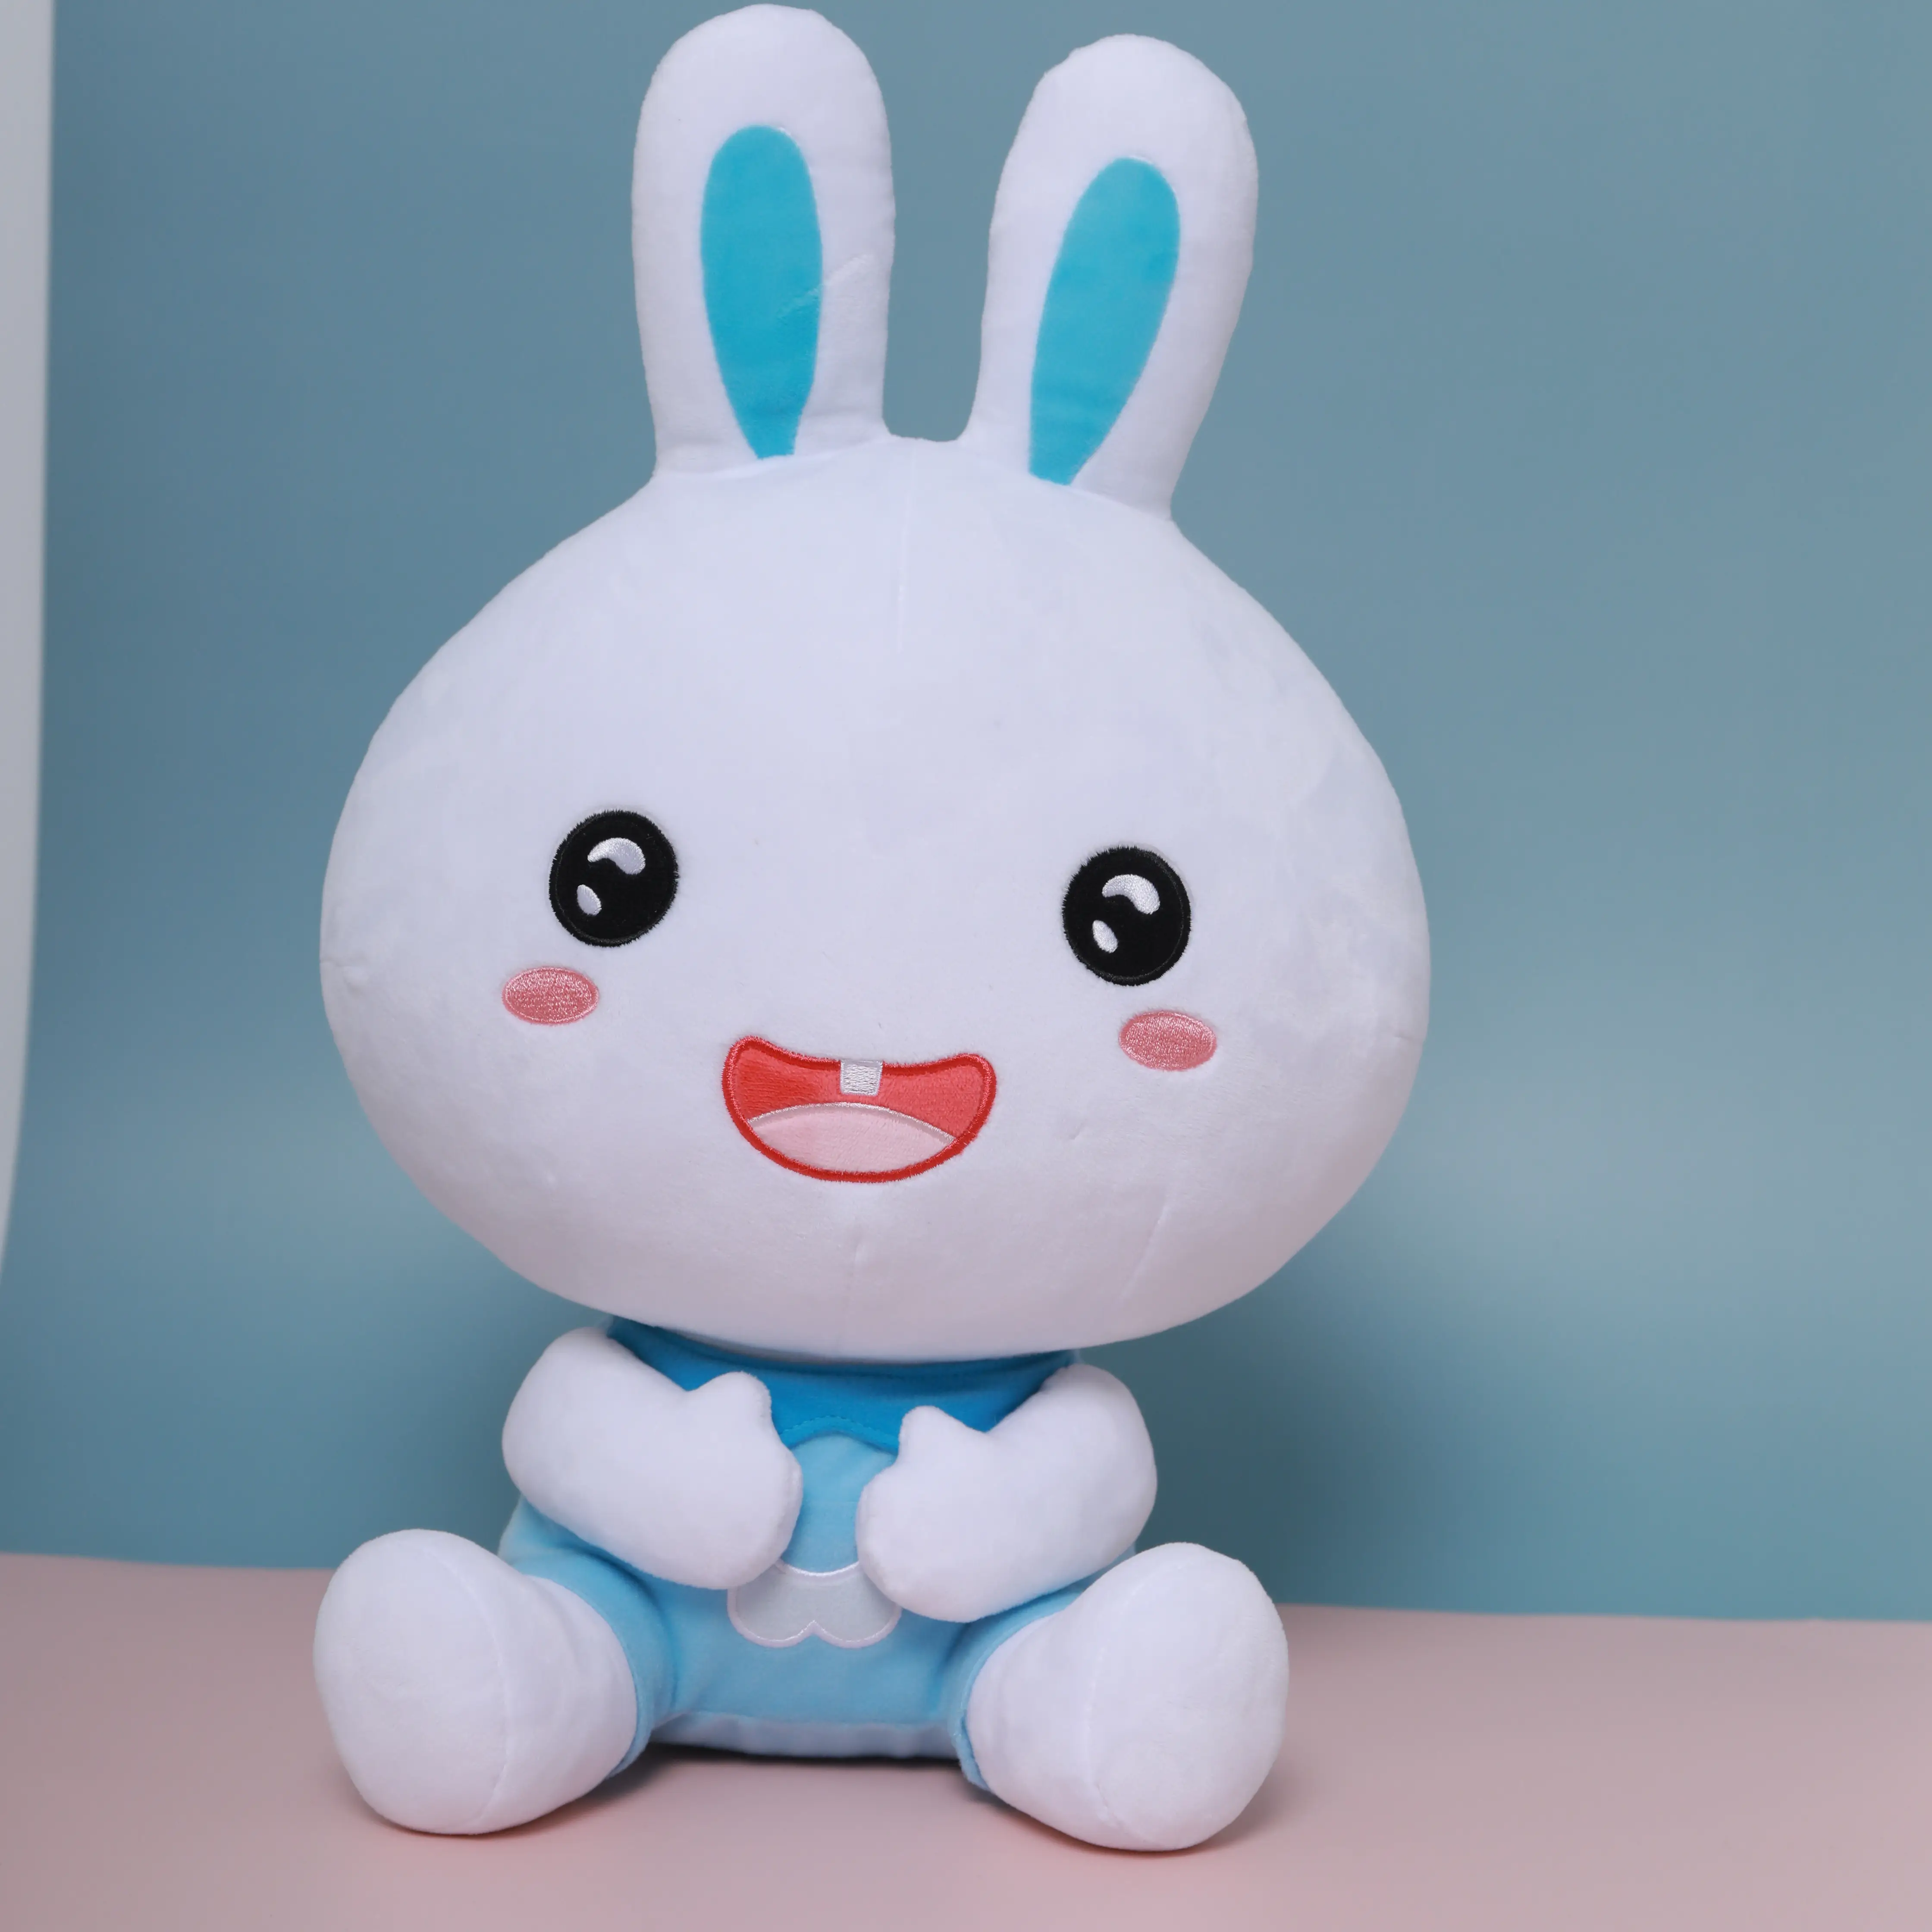 Alilo Soft Stuffed Animal Toys Baby Gift Toys For Kids